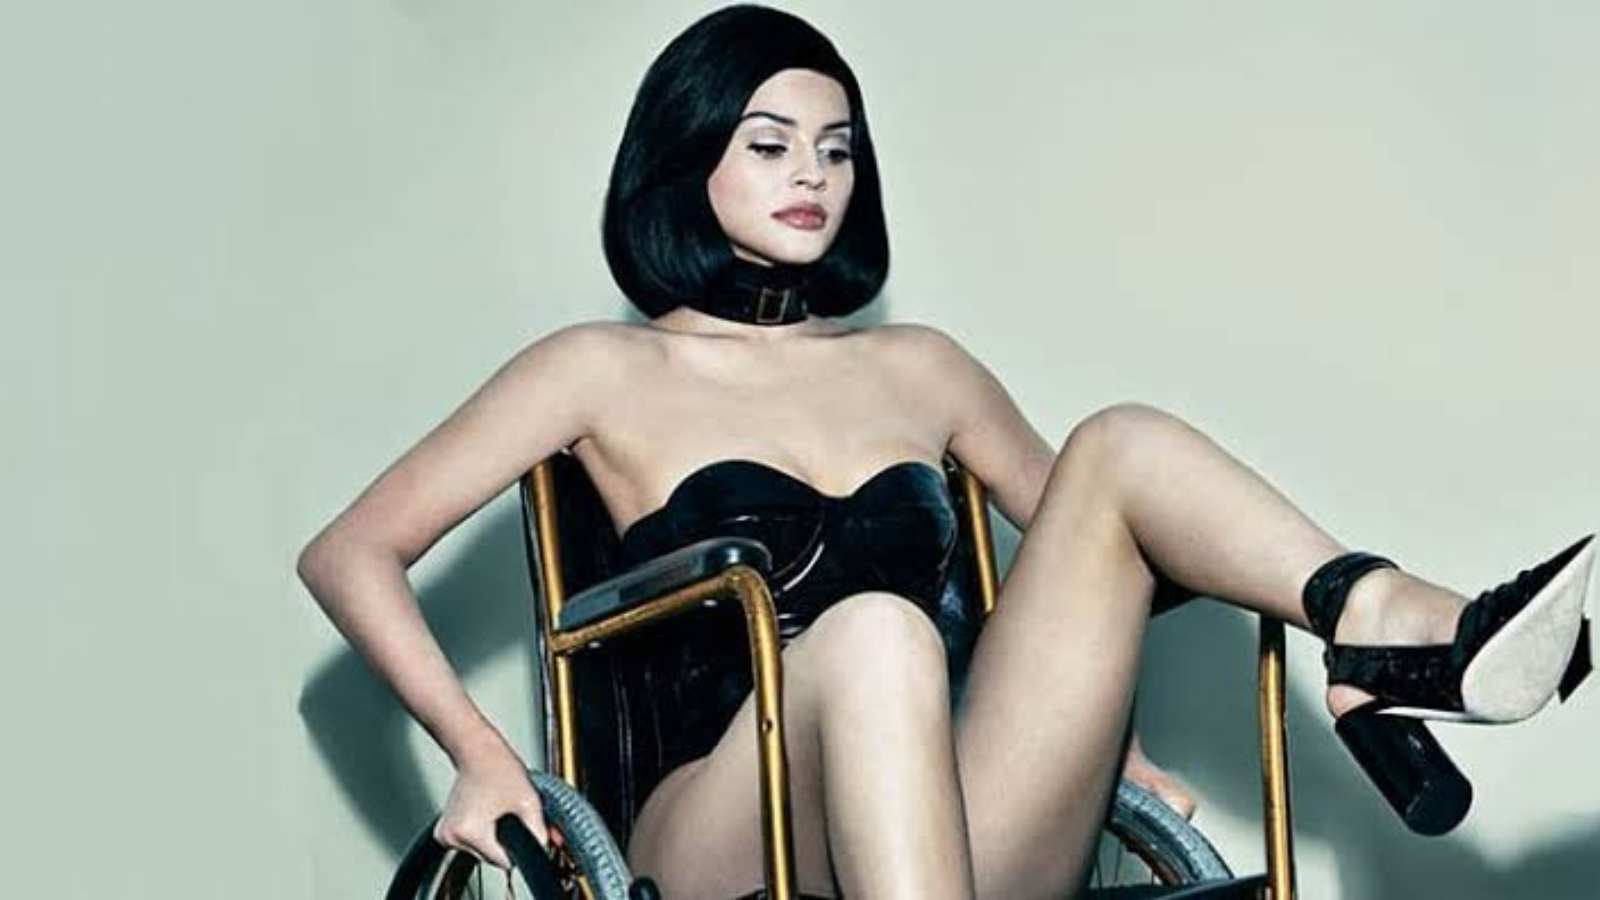 Kylie Jenner for the Interview magazine shoot